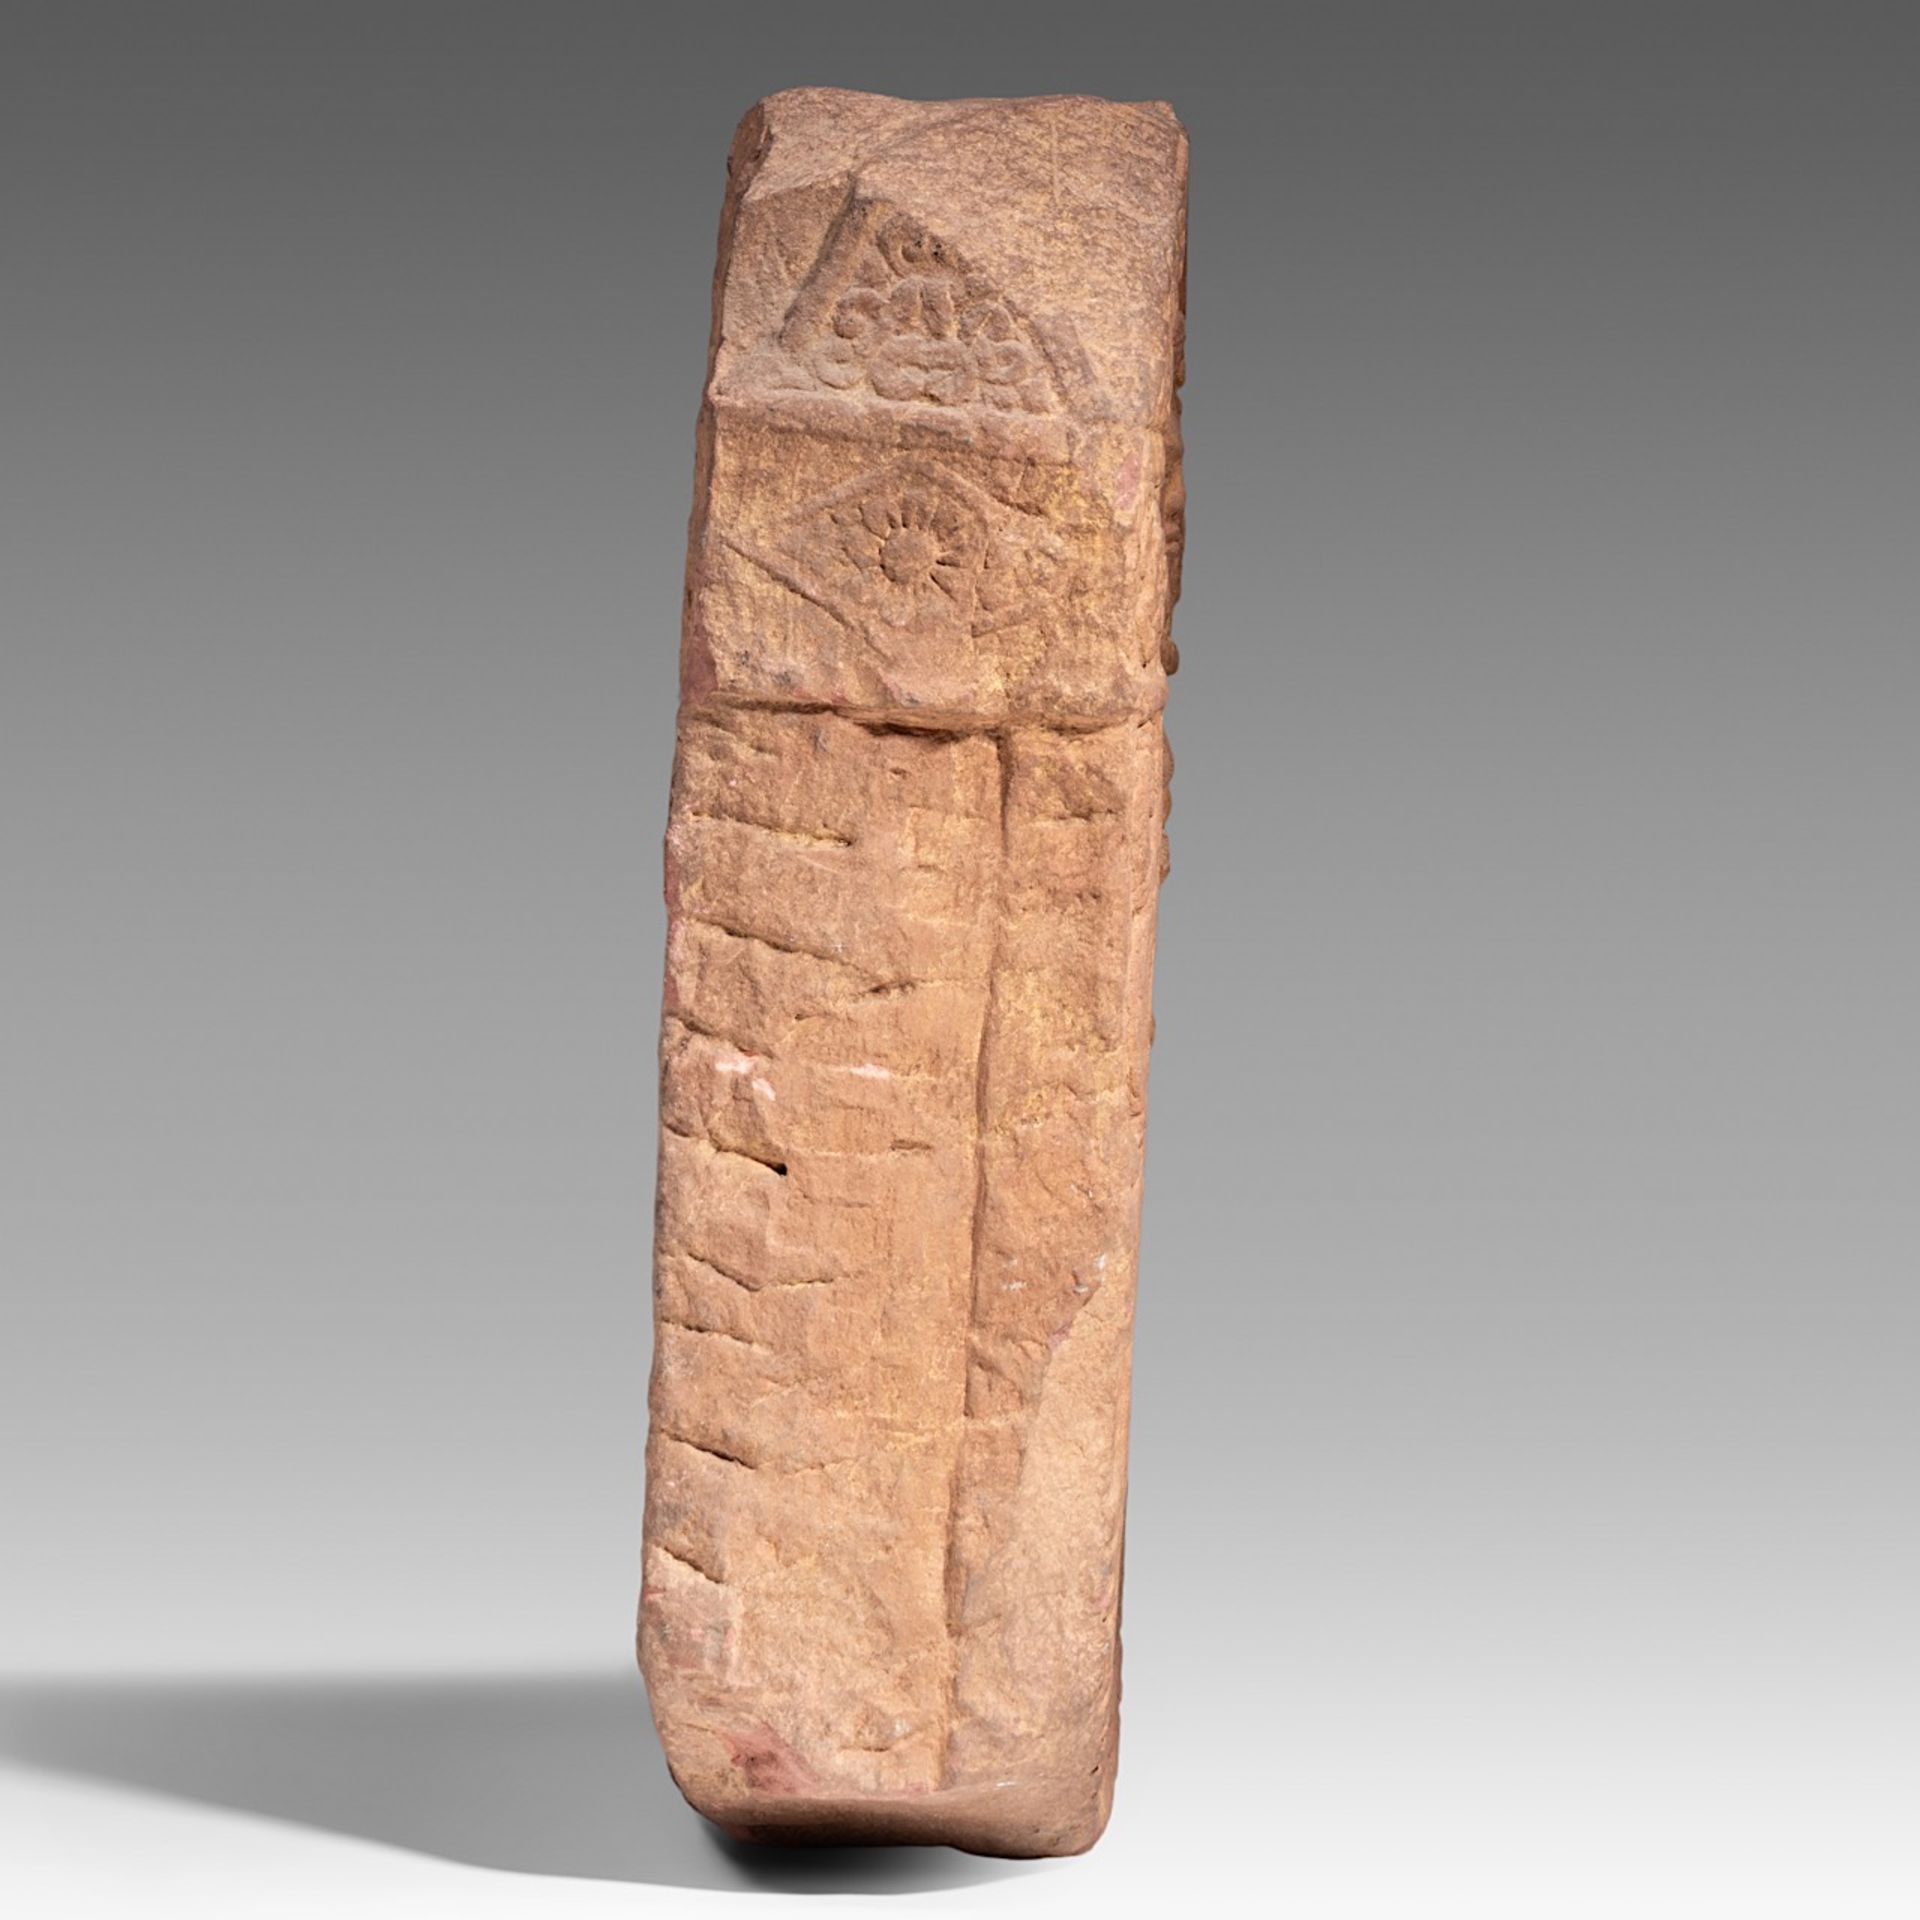 A sandstone fragment depicting a divinity, Khmer, presumably Bayon style, H 62 - W 45 cm - Image 5 of 5